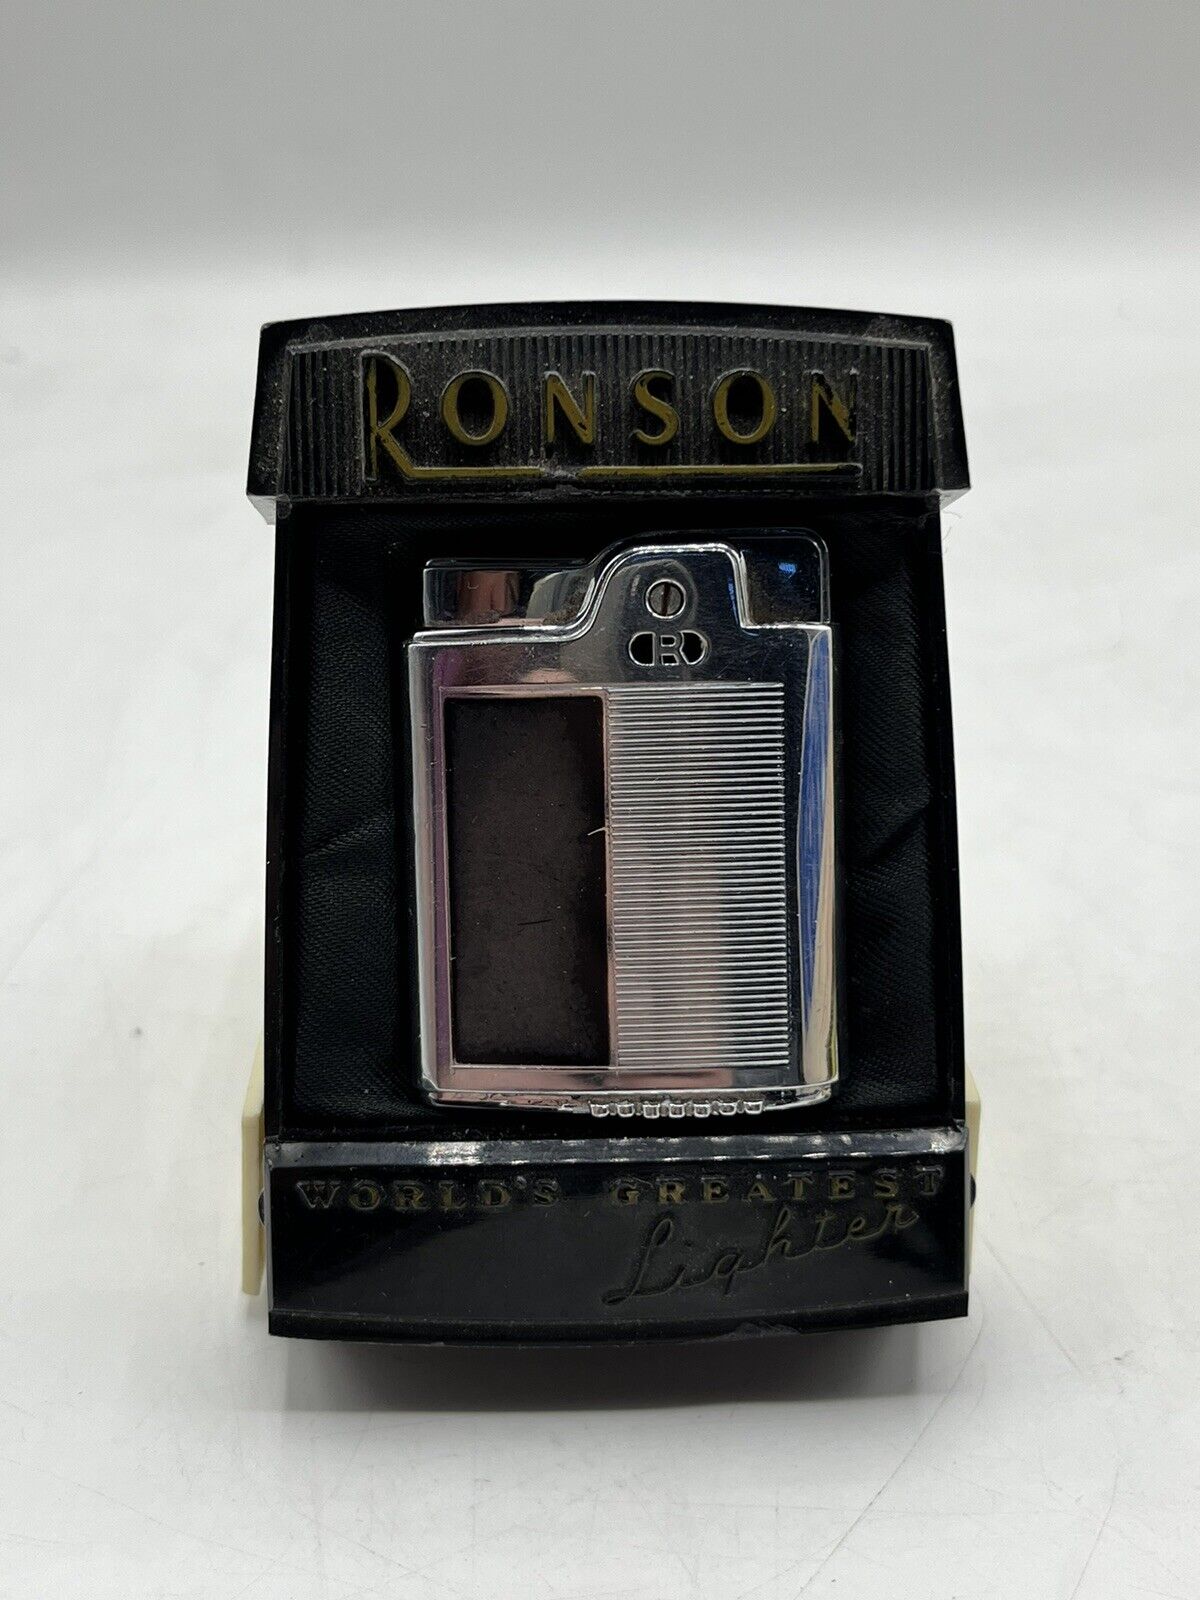 Vintage Ronson Lighter Essex Made In Newark NJ With Original Case Untested As Is